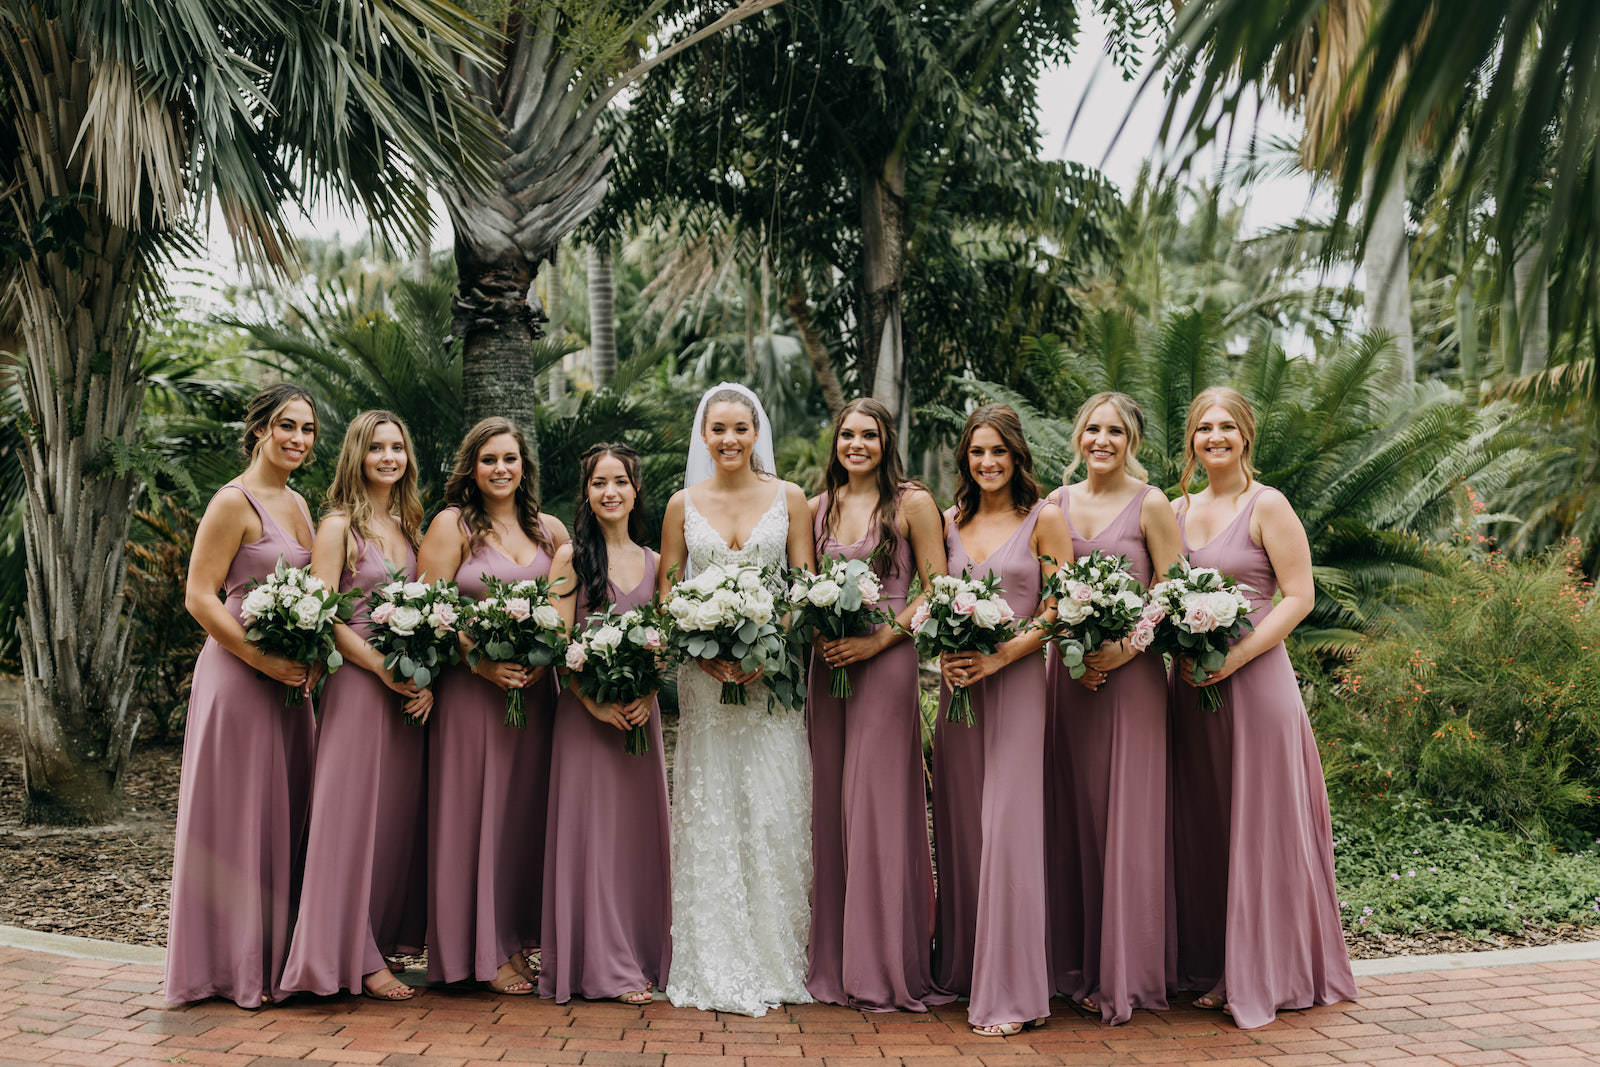 Bride and Bridesmaids in Purple Long Dresses Portrait | Florida Wedding Photographer Amber McWhorter Photography | Tampa Florida Hair and Makeup Artist Femme Aoki